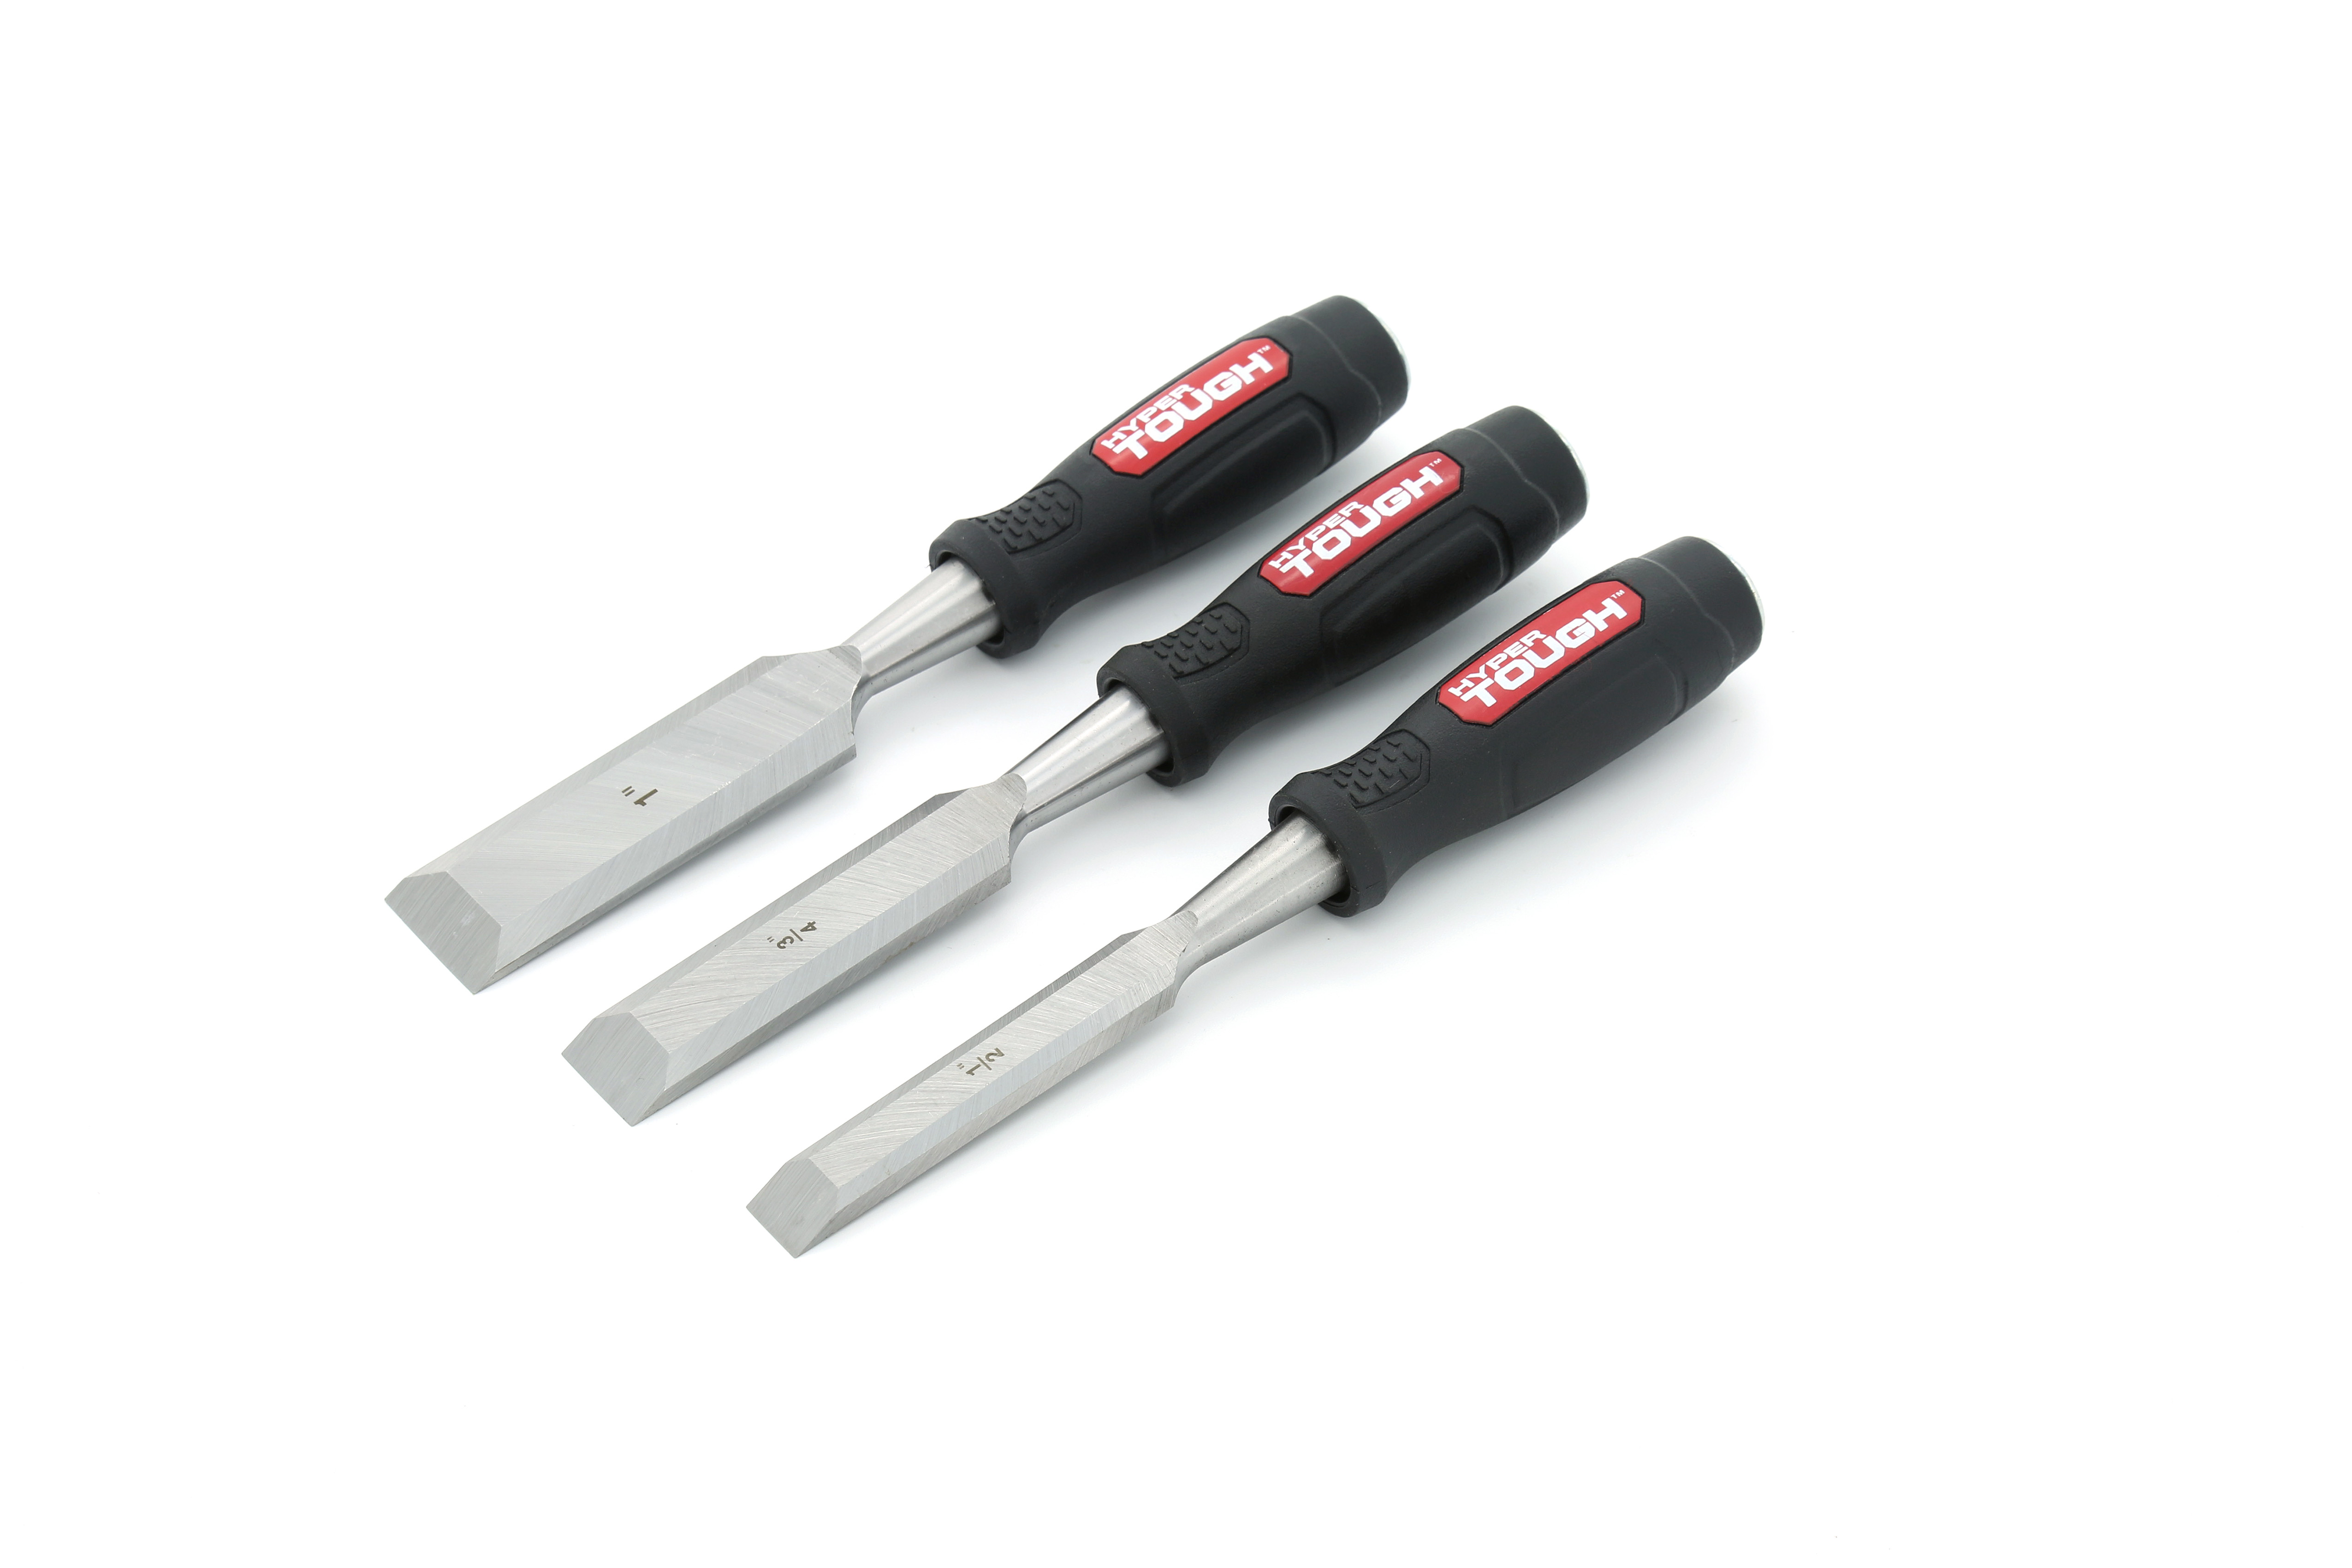 Do it Wood Chisel Set (3-Piece) - Town Hardware & General Store